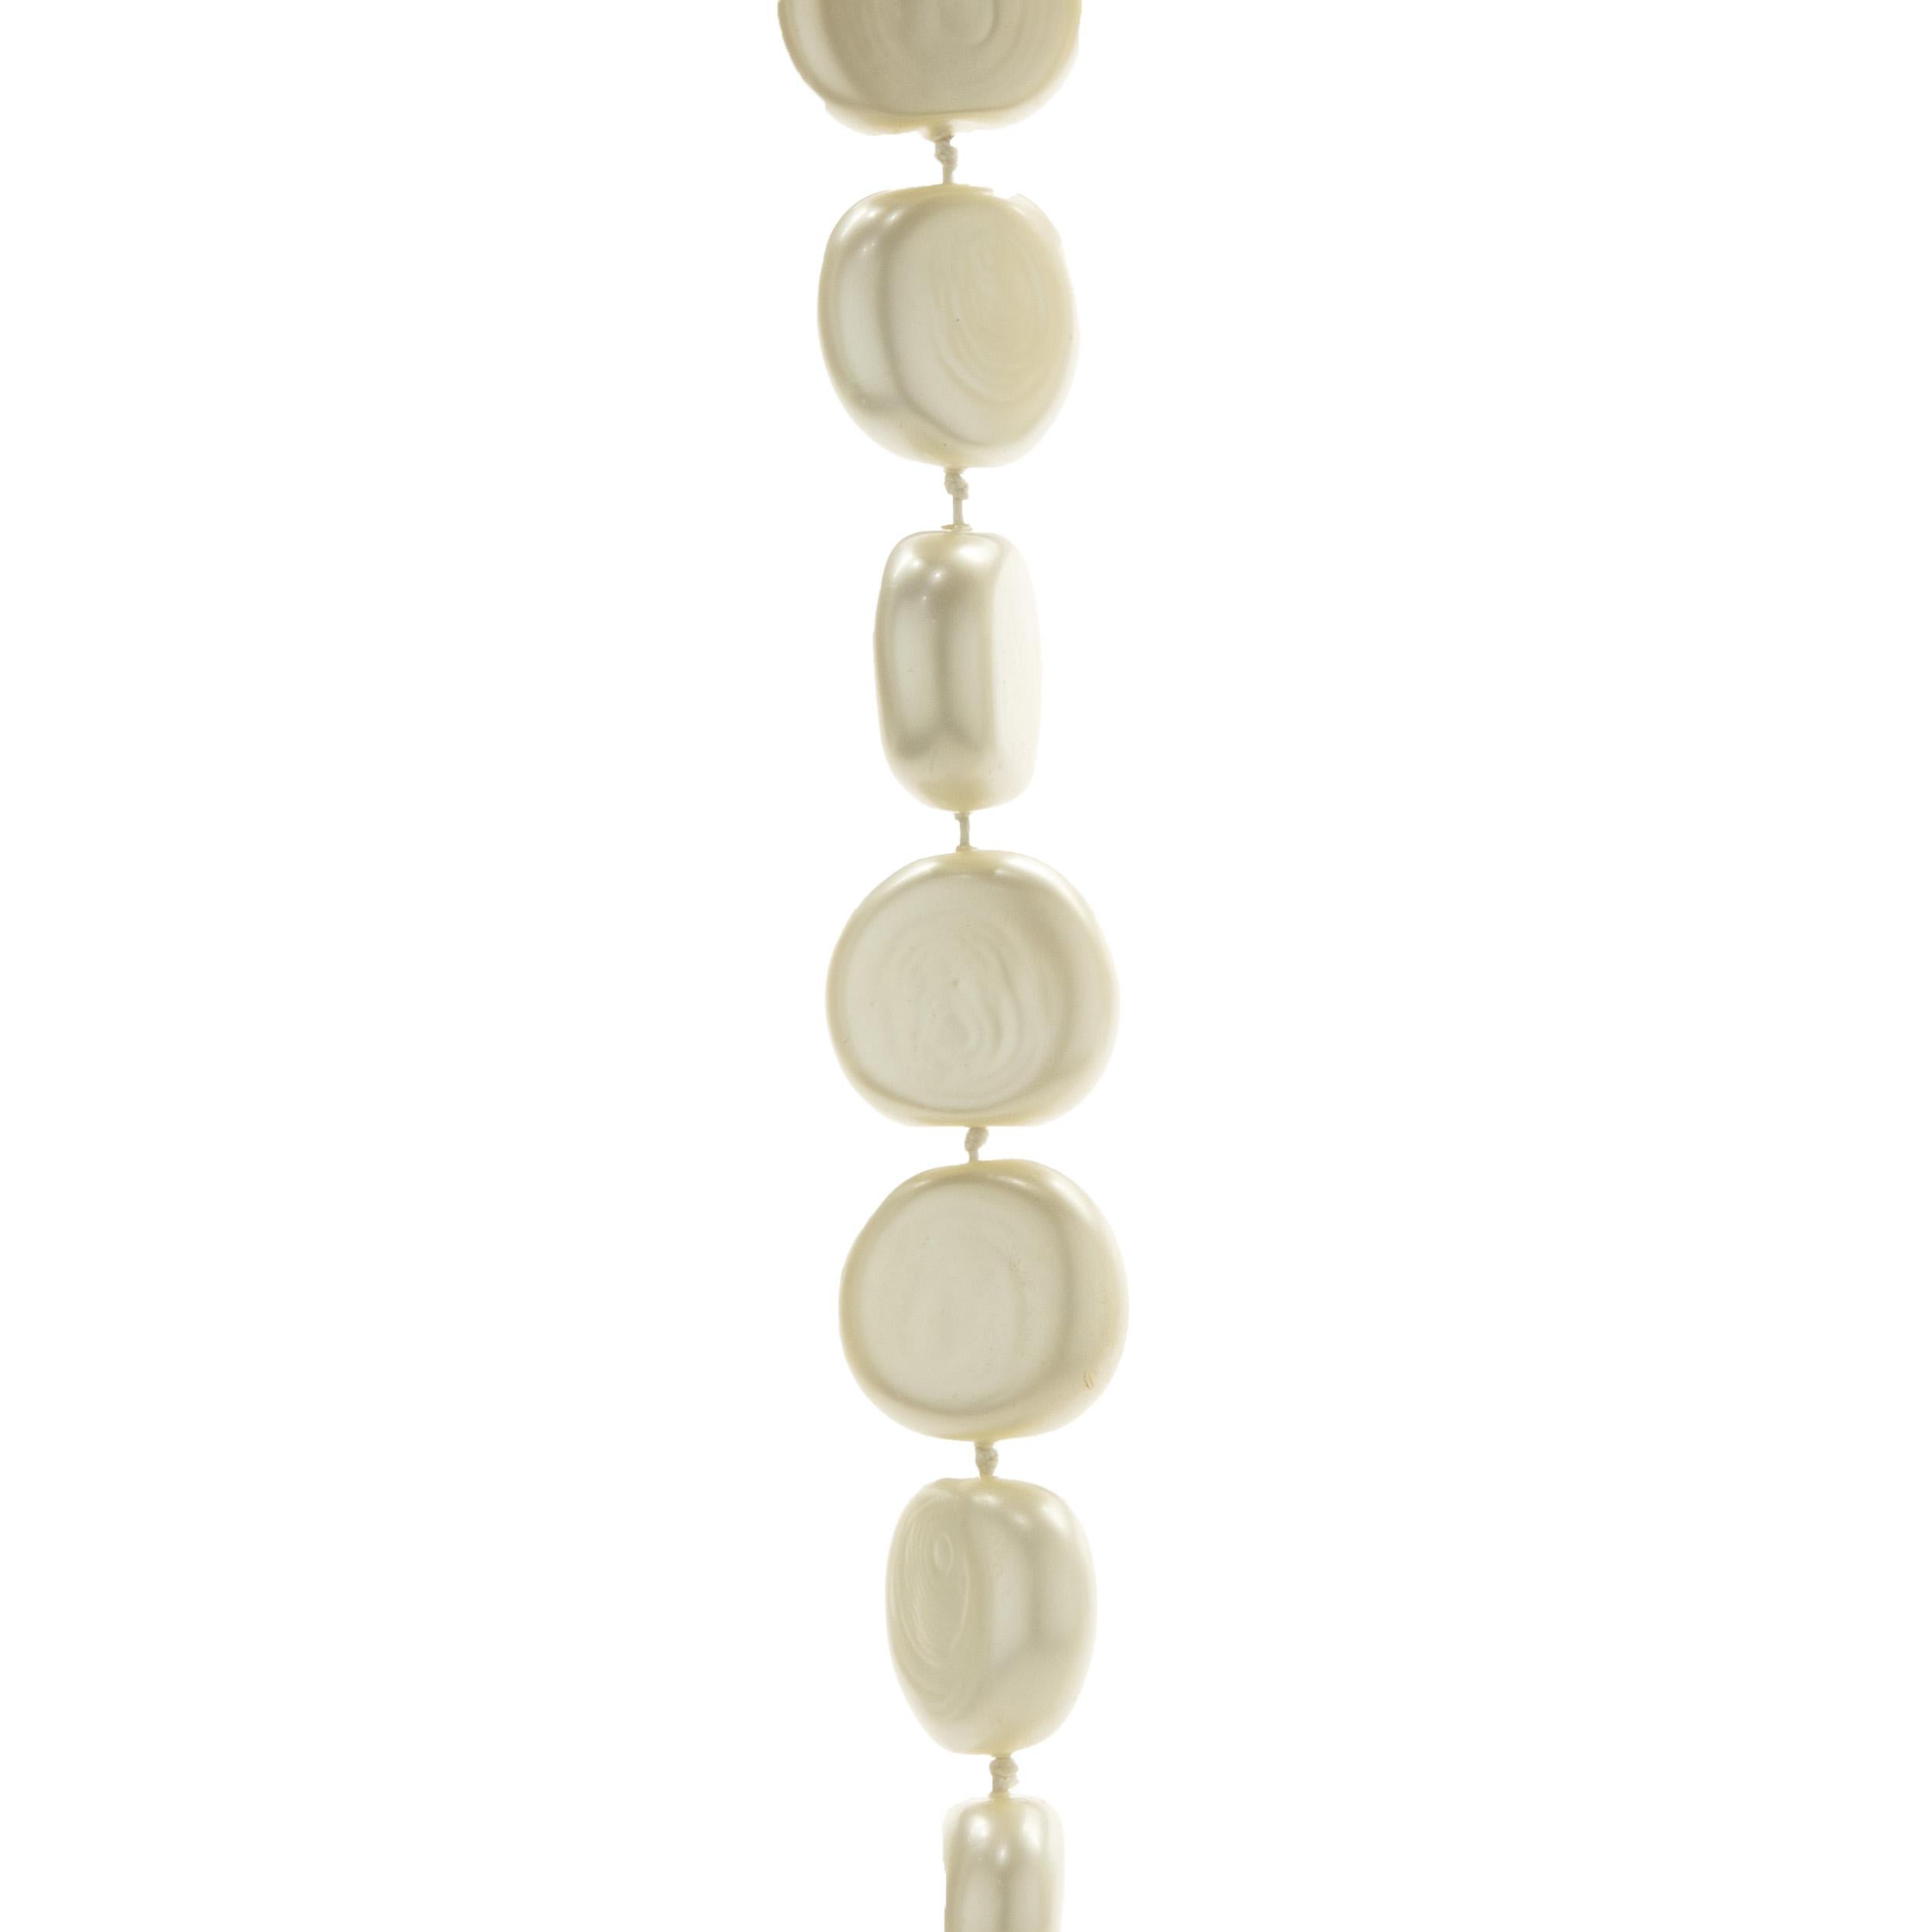 Designer: Chanel
Material: pancake pearls
Weight: 238.43 grams
Dimensions: necklace measures 28-inches